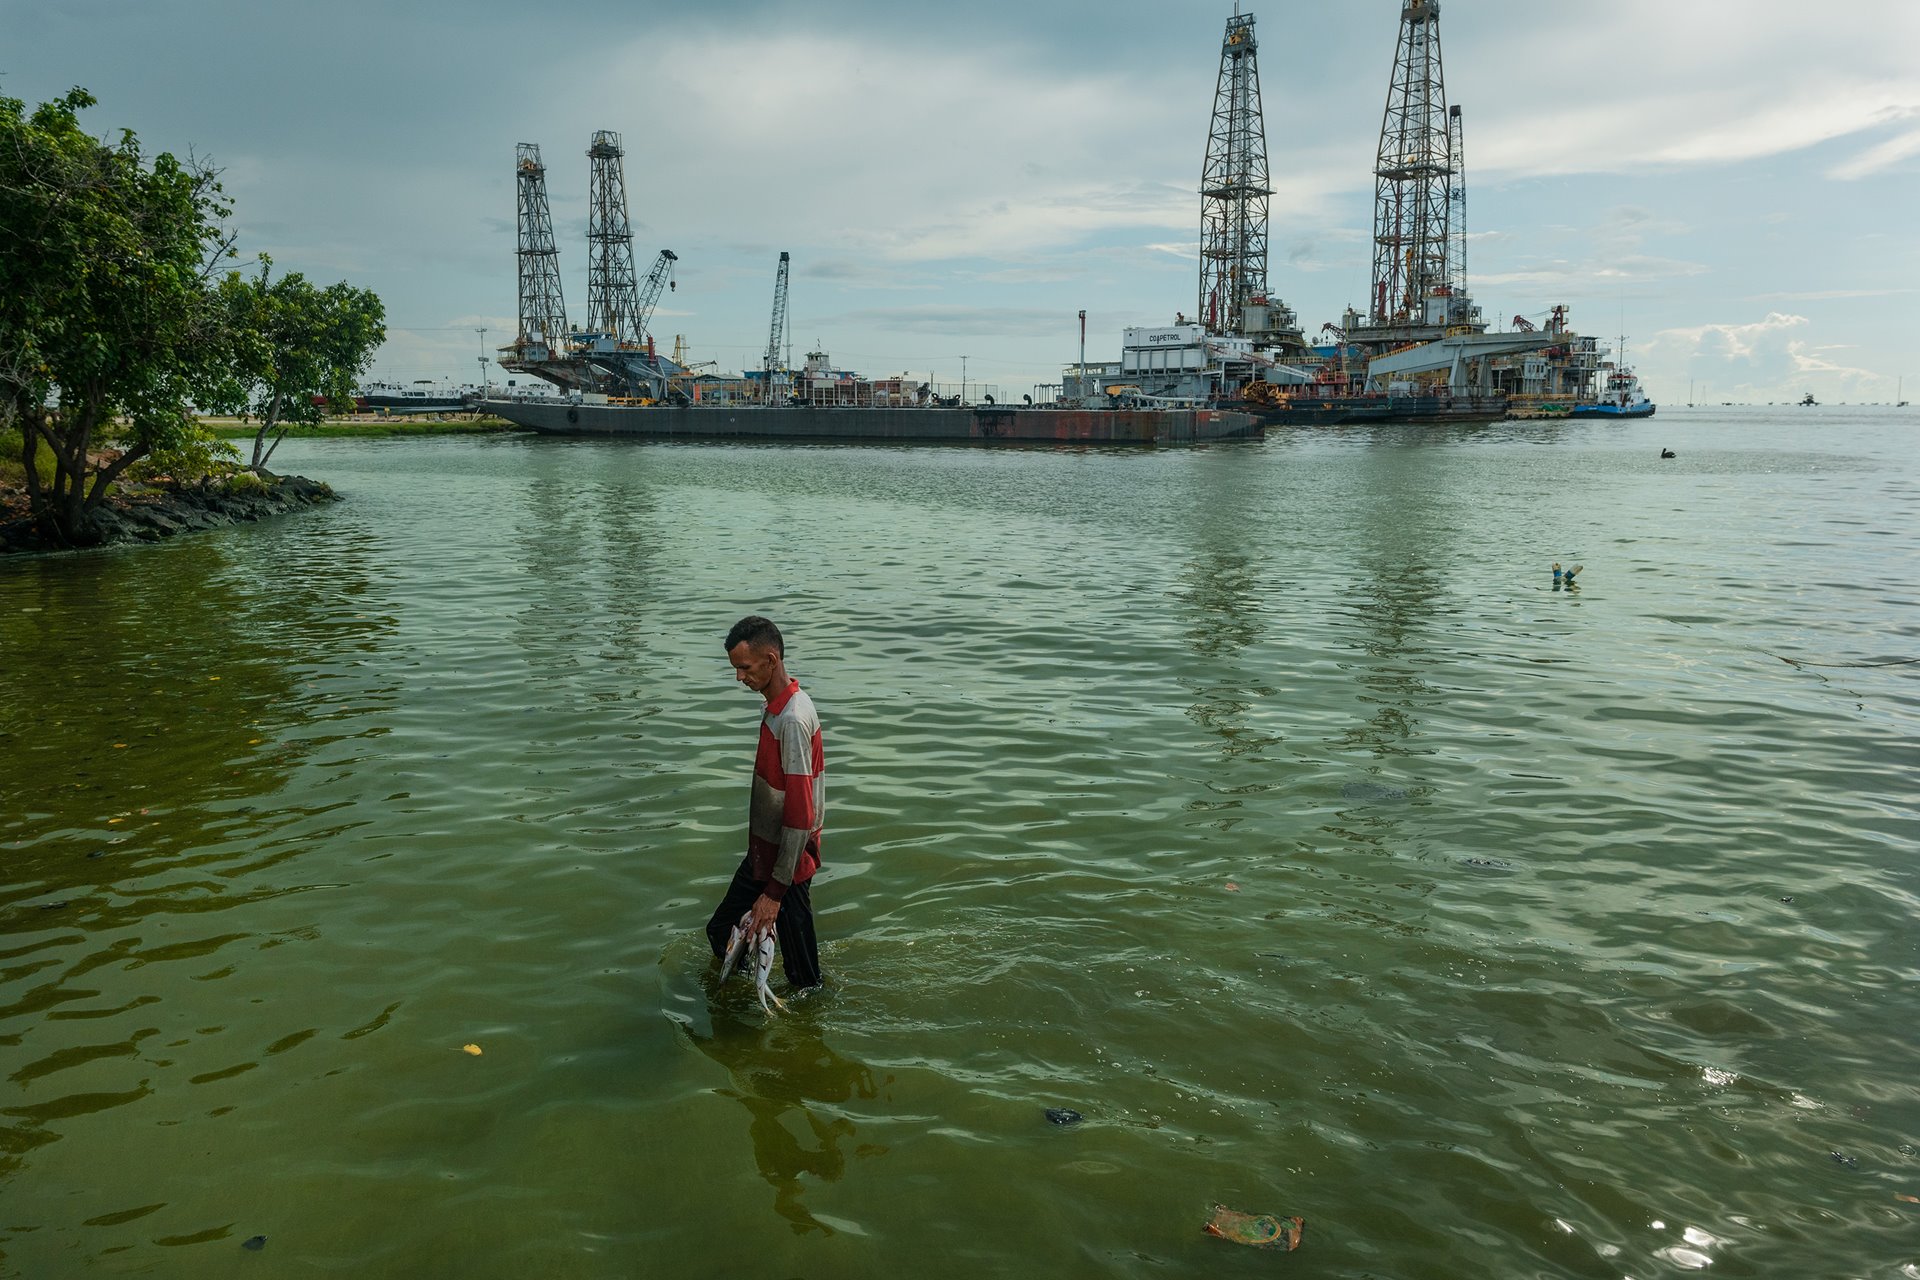 Wilmer Parra (32), with a handful of fish he caught in Lake Maracaibo, Cabimas, Venezuela, walks from his boat to shore through waters covered in algae. The nation&#39;s largest oil fields are located around and beneath Lake Maracaibo. Along with oil slicks, the lake has become covered with algae caused by discharged fertilizers, sewage, and other chemicals.&nbsp;